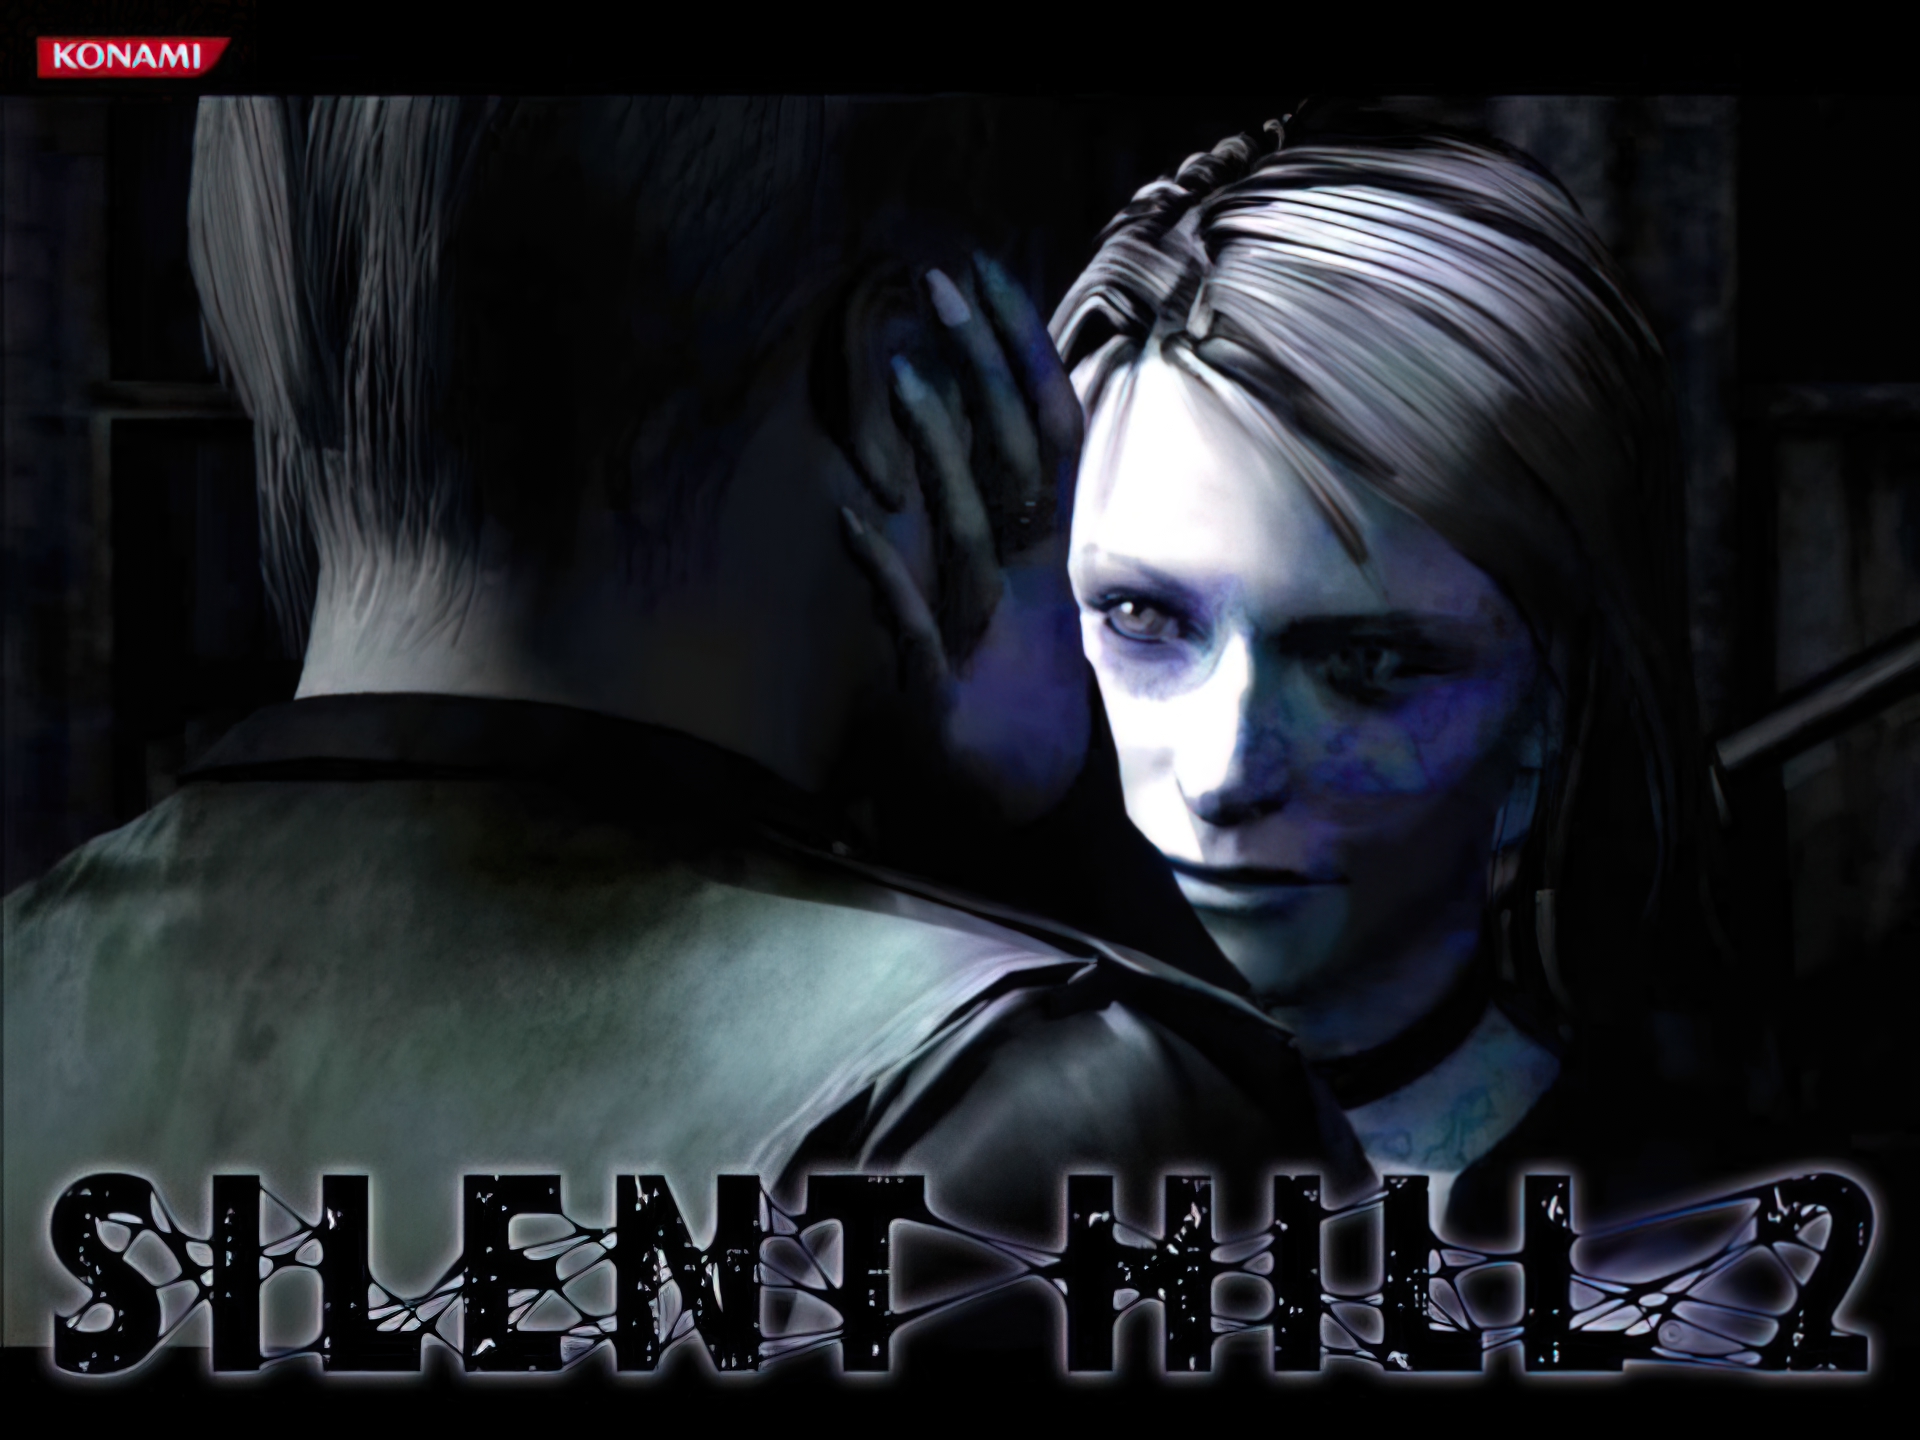 A haunting scene from Silent Hill 2, with eerie atmosphere and a sense of dread.